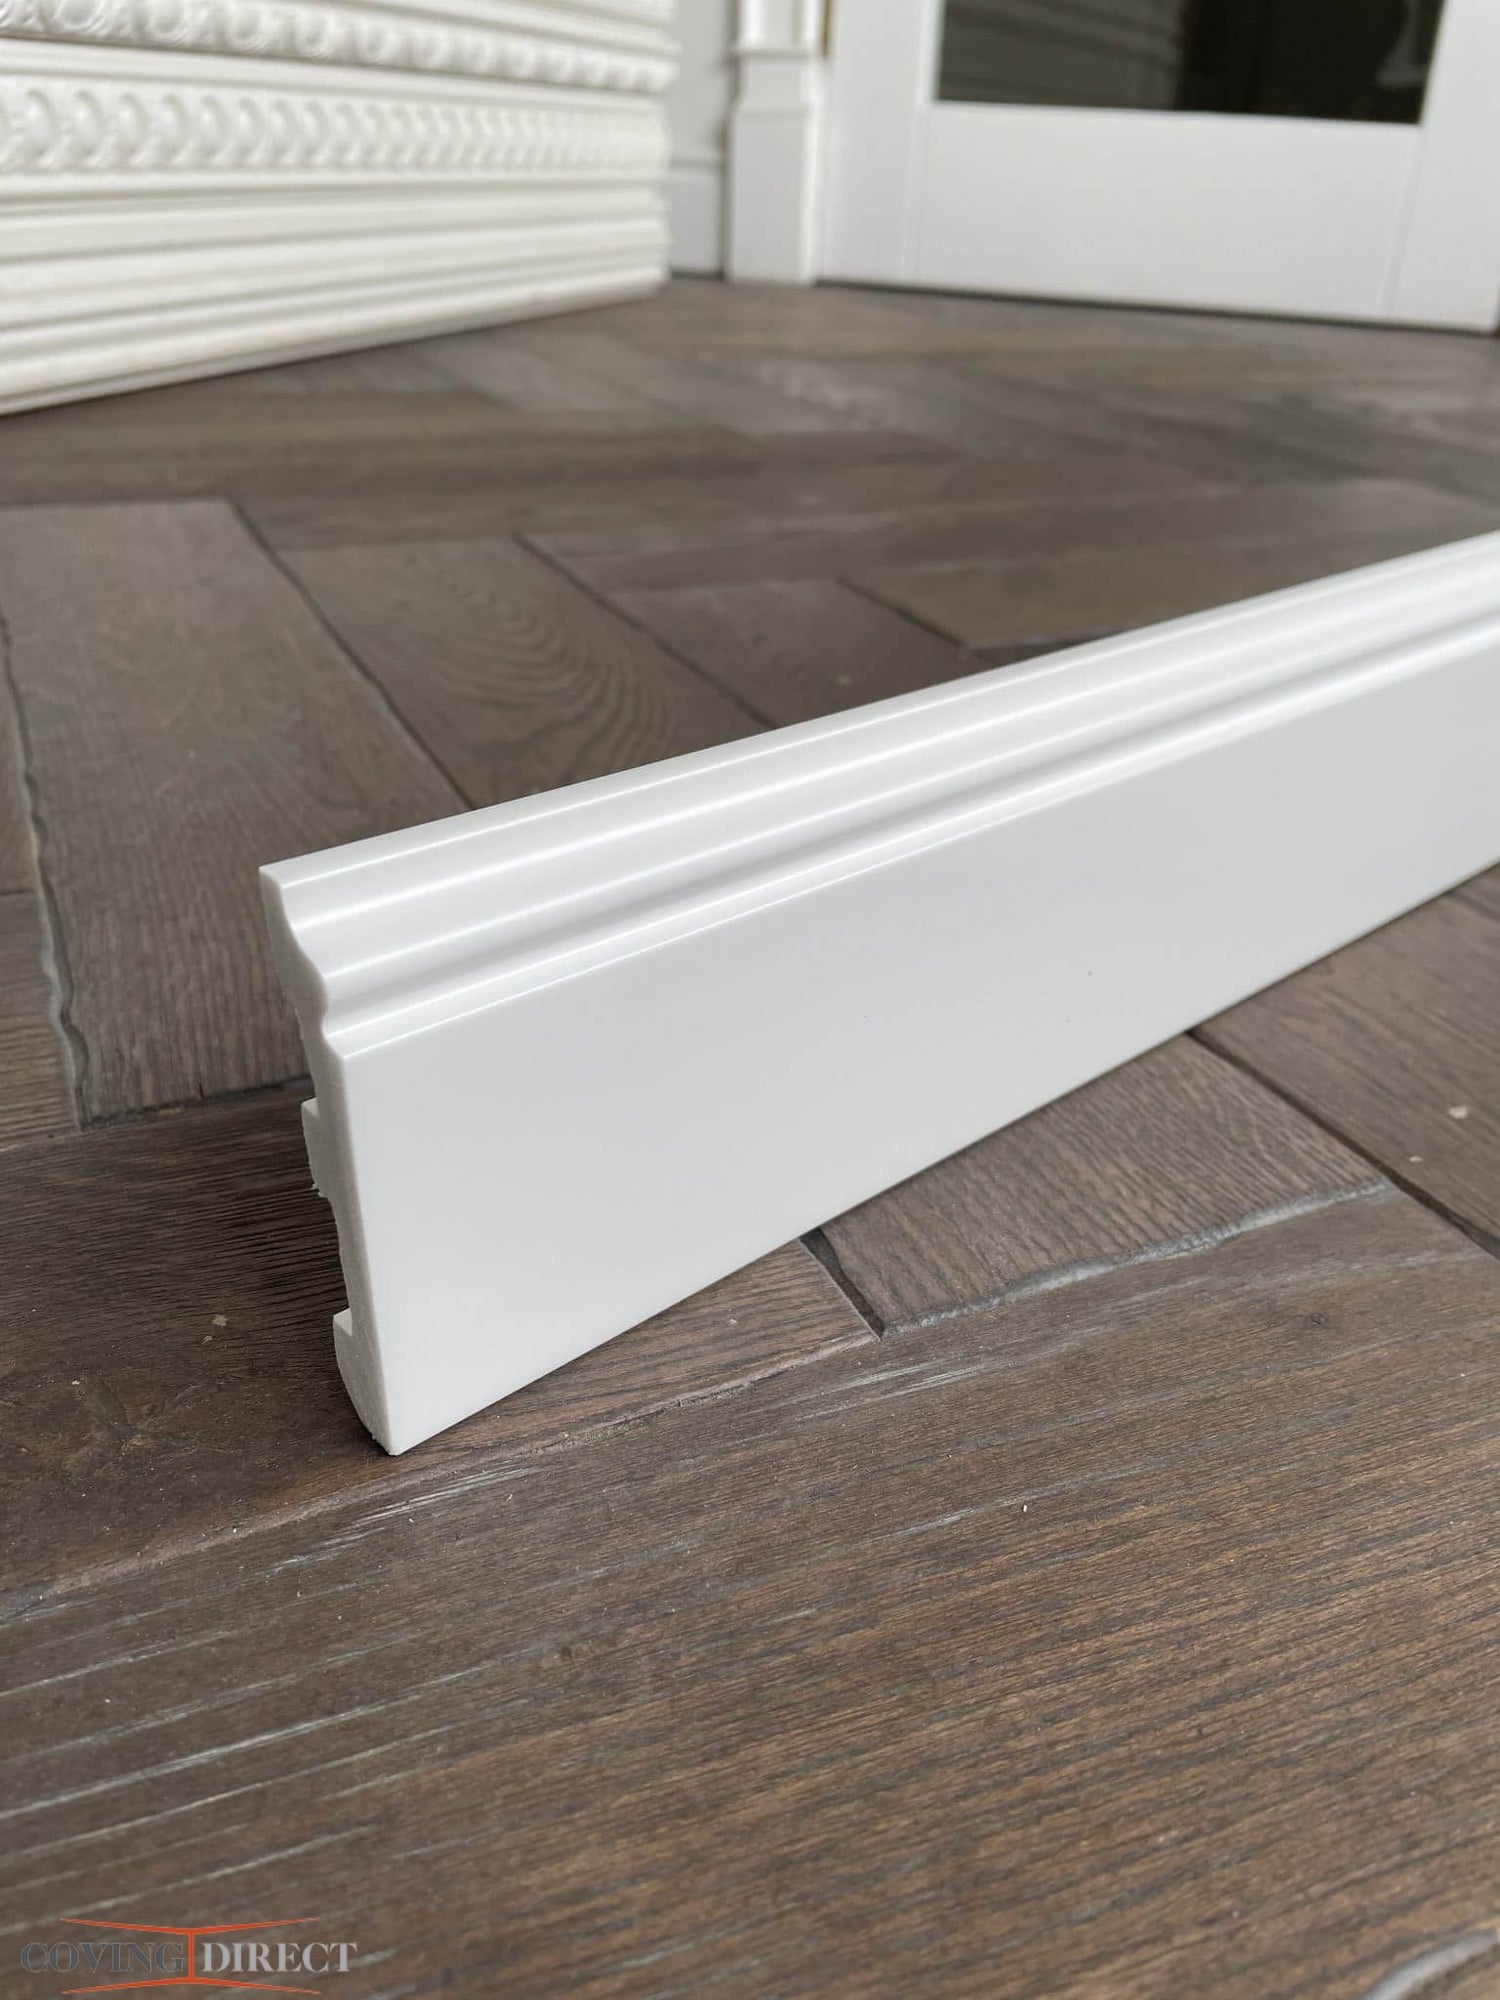 MD018P - Skirting Board on a floor